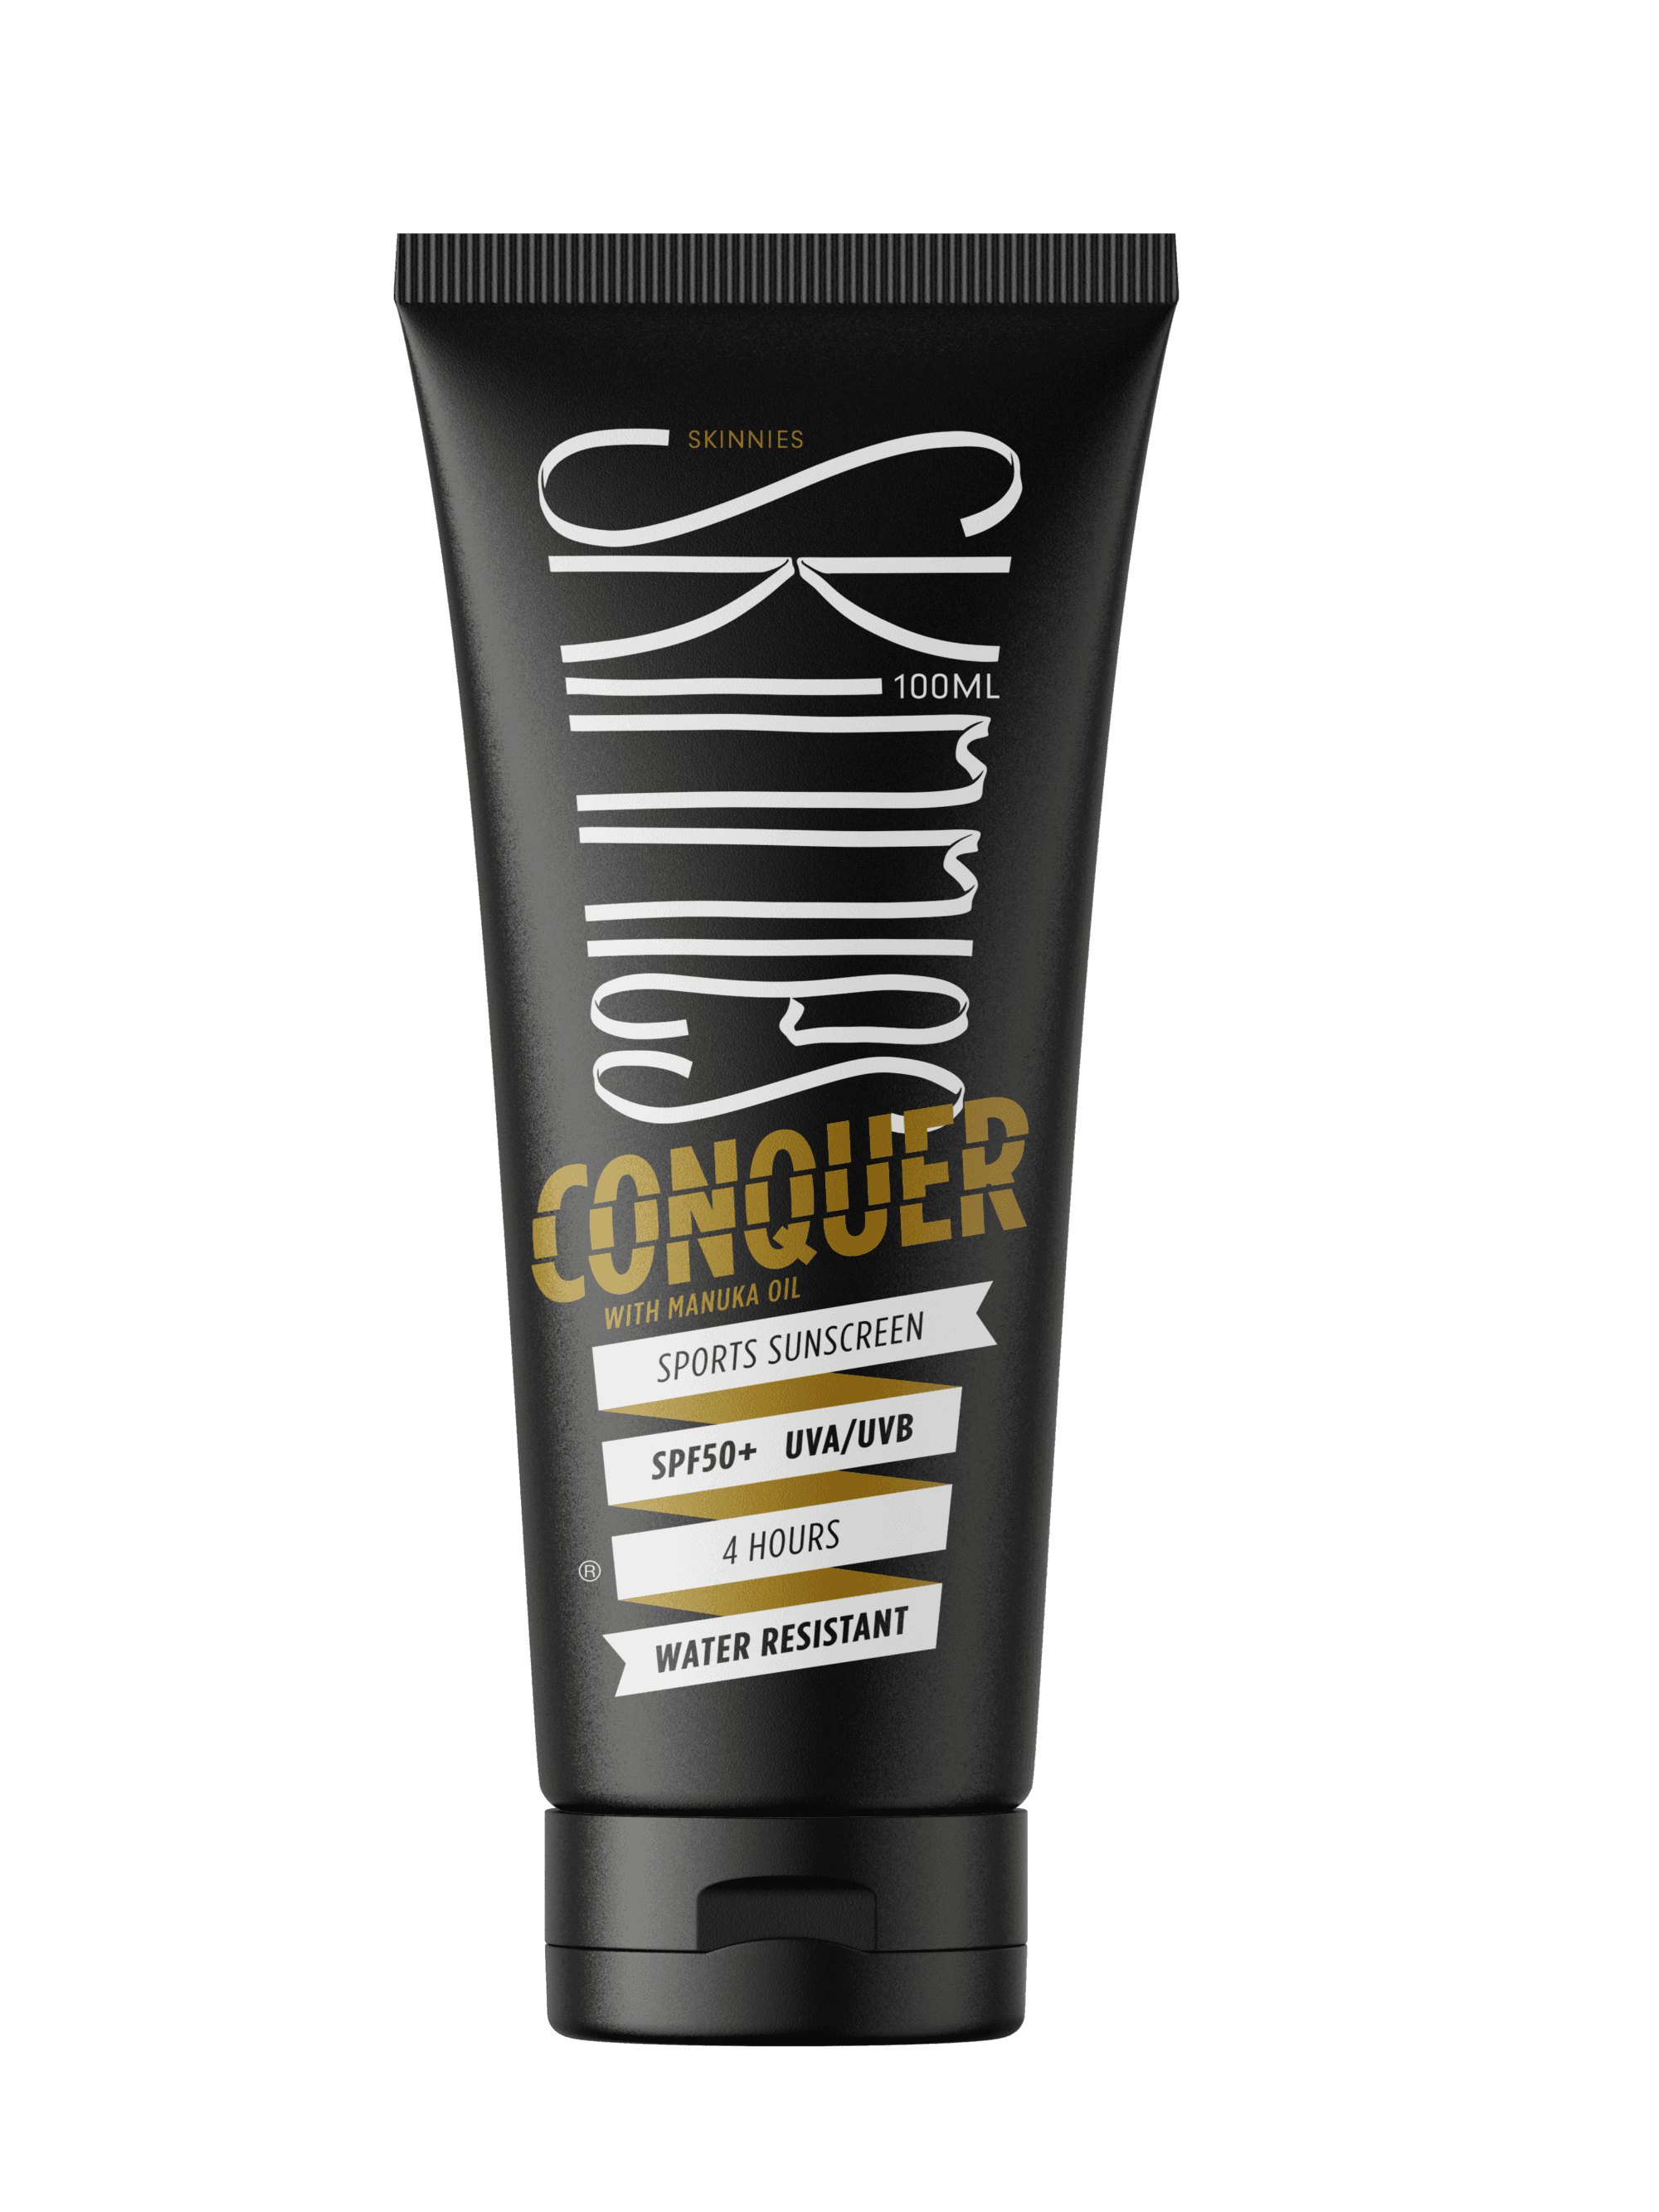 Skinnies - Gel Solaire Conquer SPF50